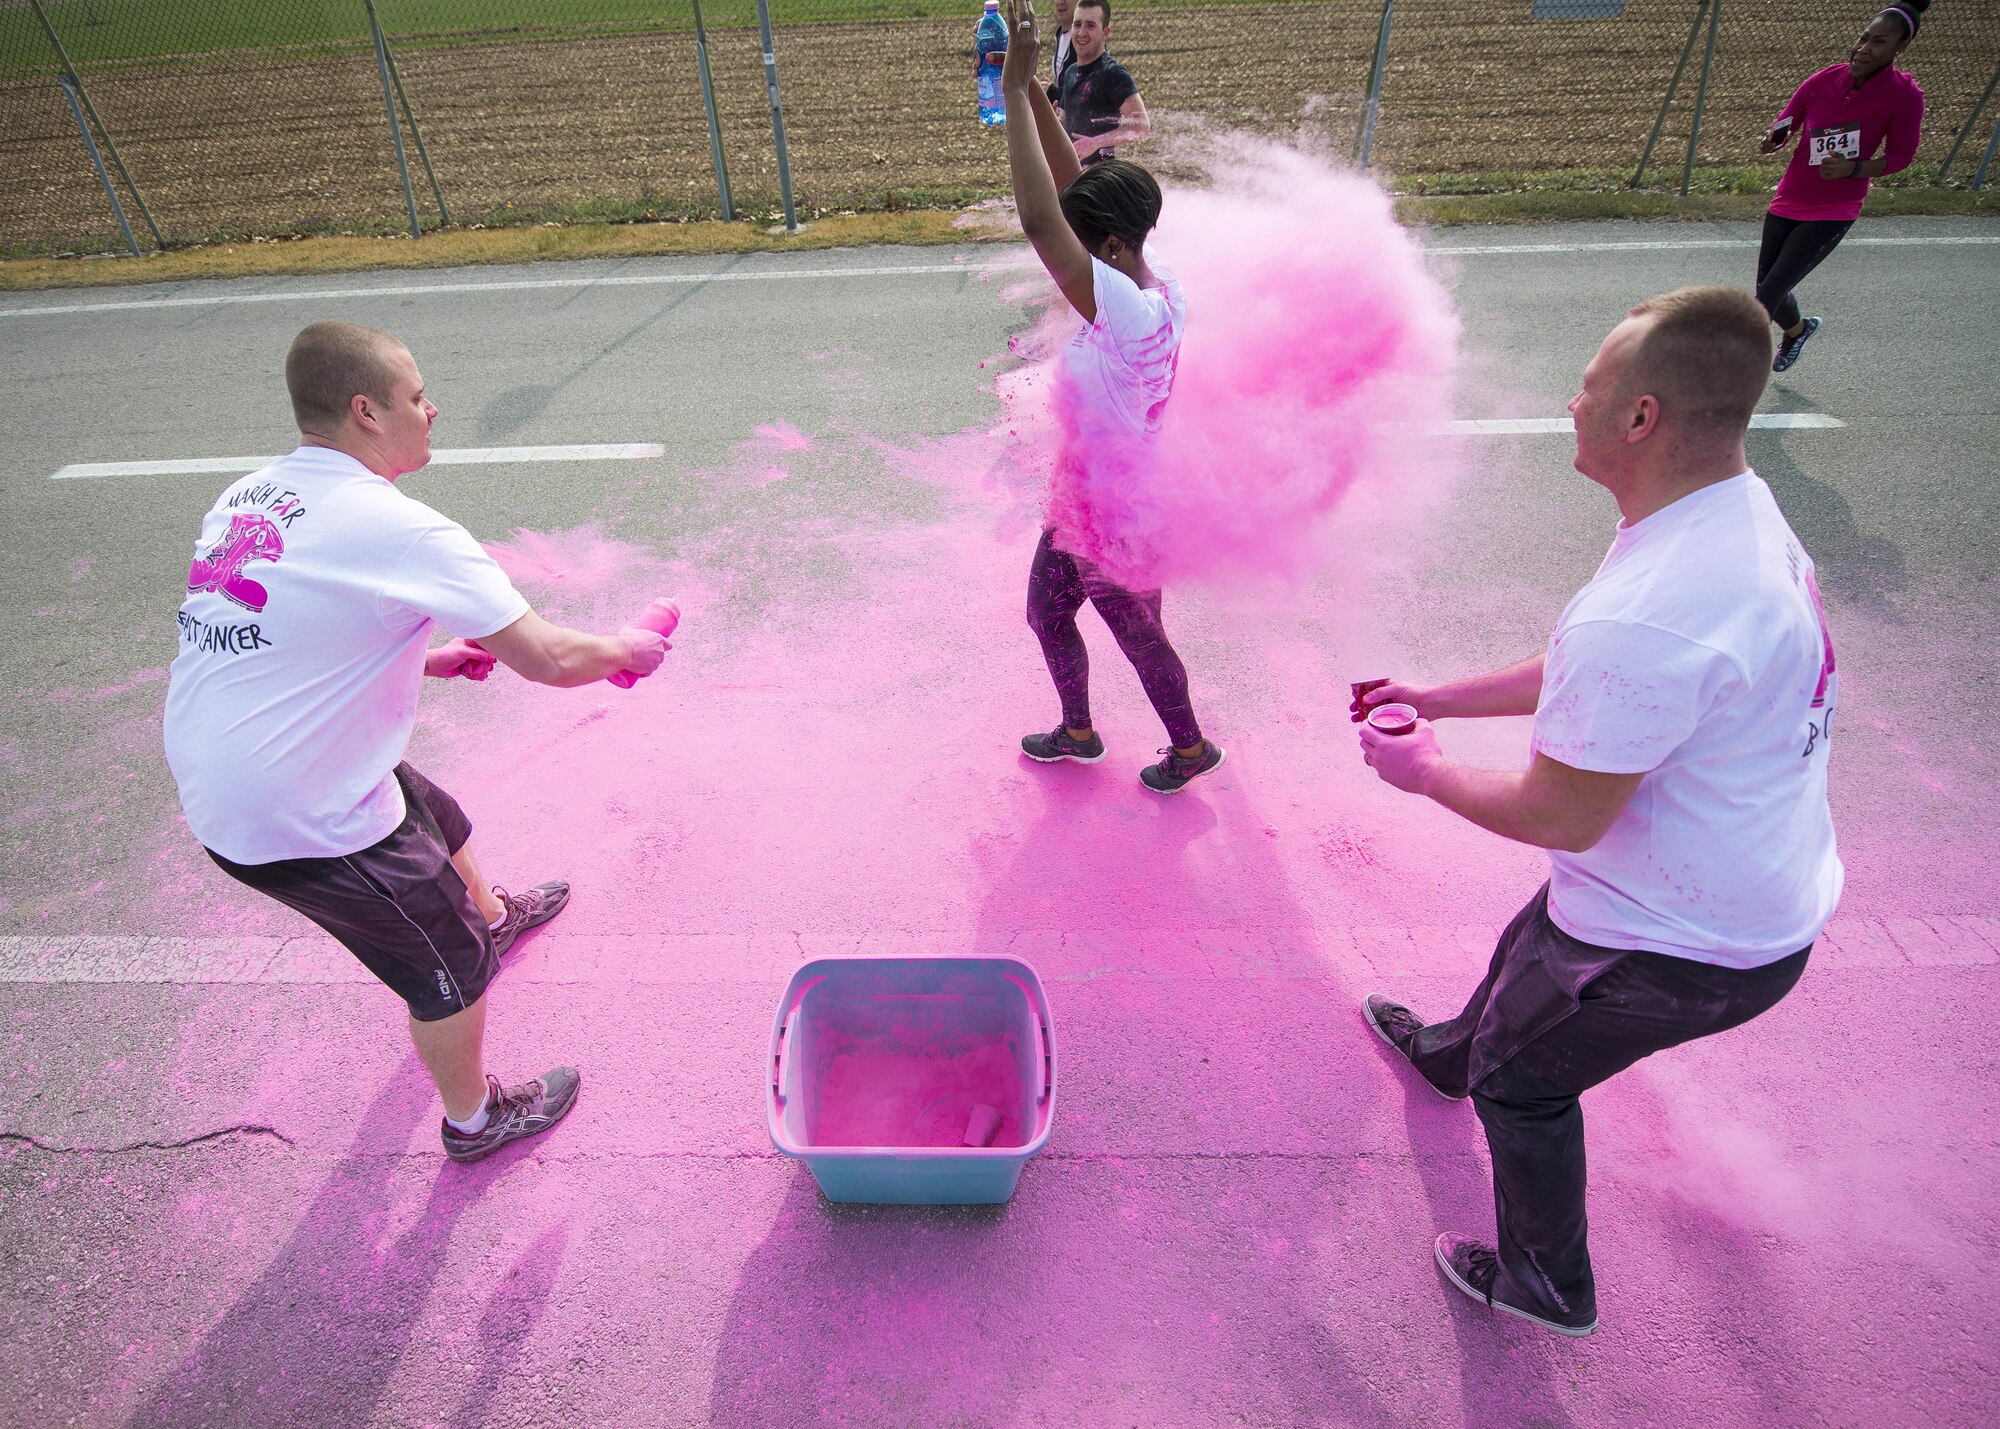 A Team Aviano member runs through pink powder during the 11th Annual Breast Cancer Awareness Walk at Aviano Air Base, Italy, March 18, 2017. The event had its largest turnout and money raised since its inception. (U.S. Air Force photo by Senior Airman Cory W. Bush)